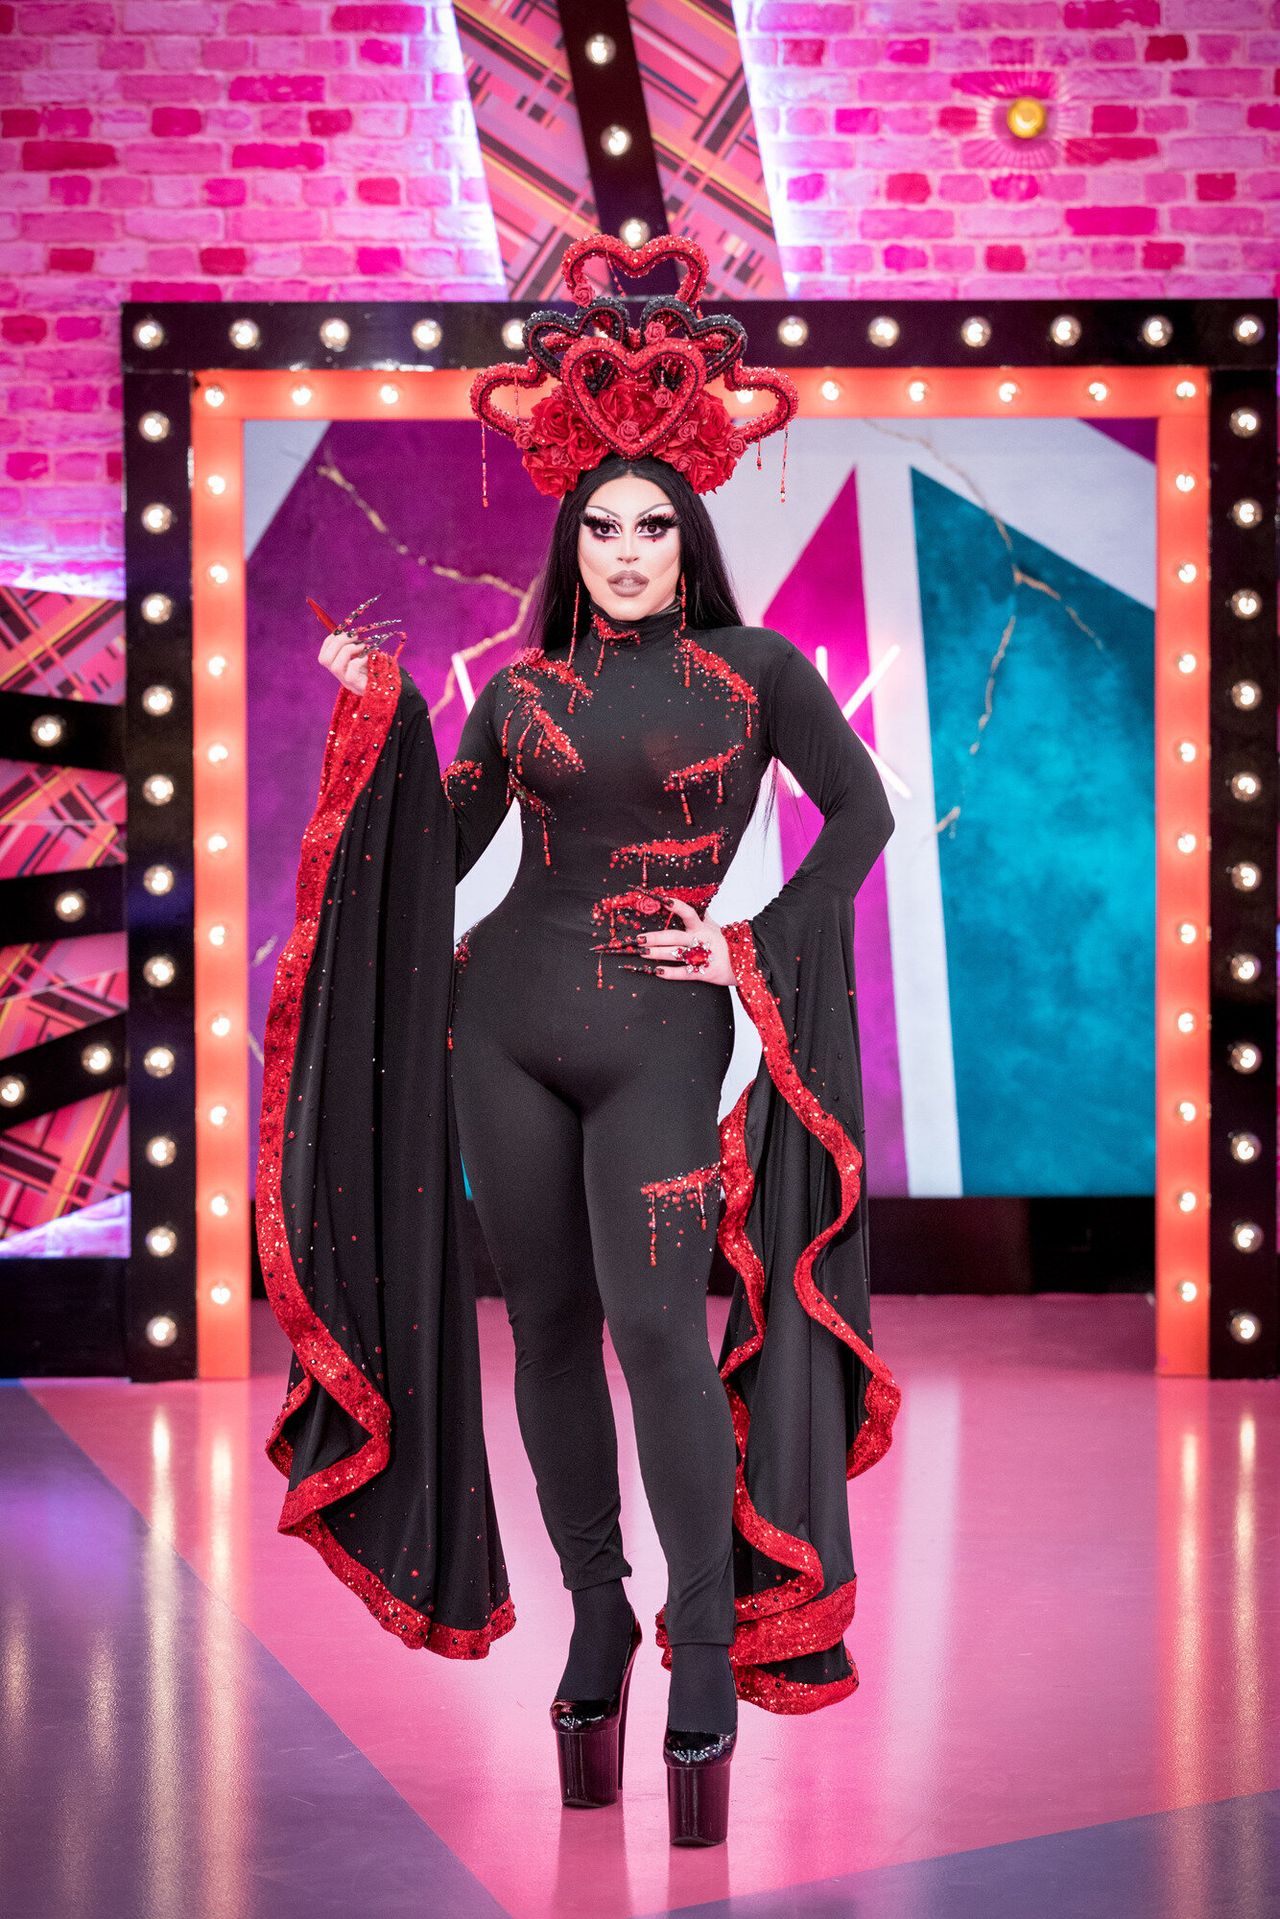 Cherry certainly made an impression with her Drag Race entrance